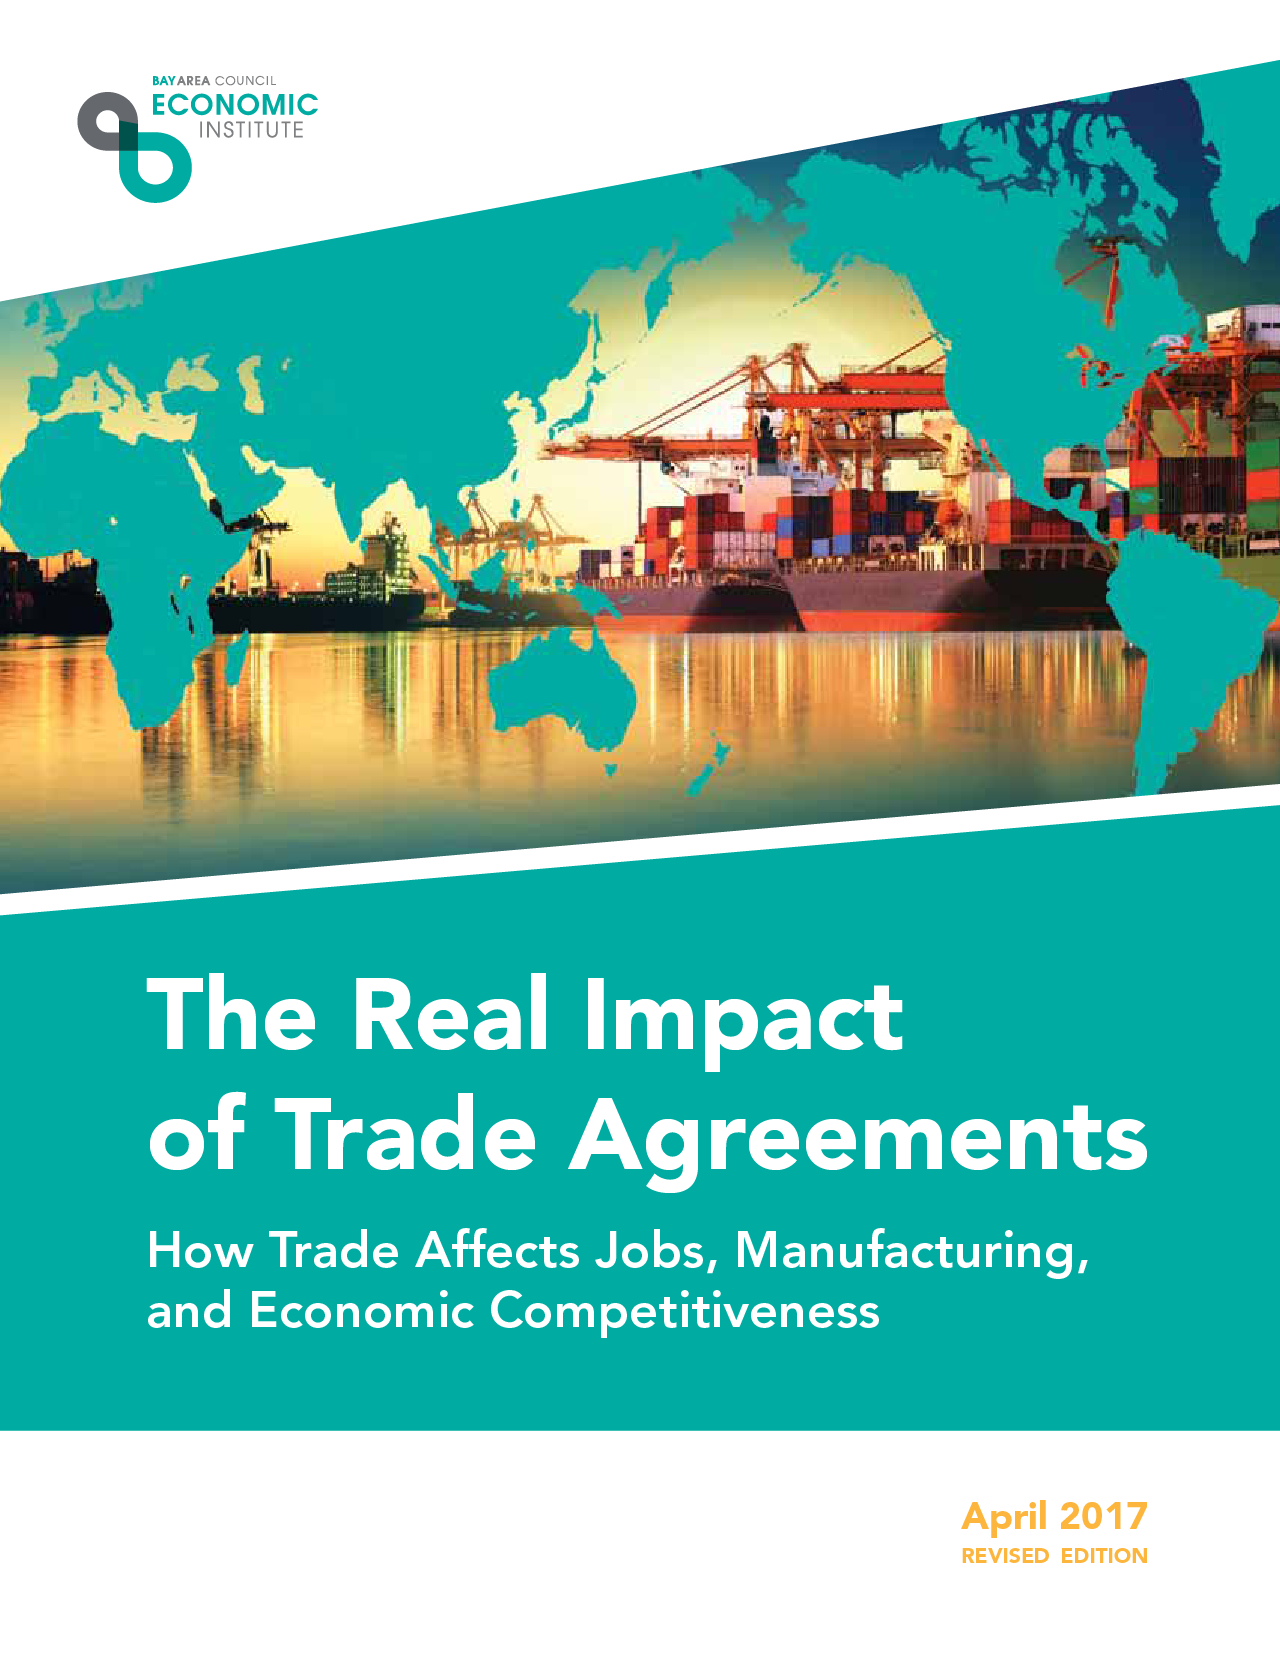 The Real Impact of Trade Agreements  Bay Area Council Economic Institute